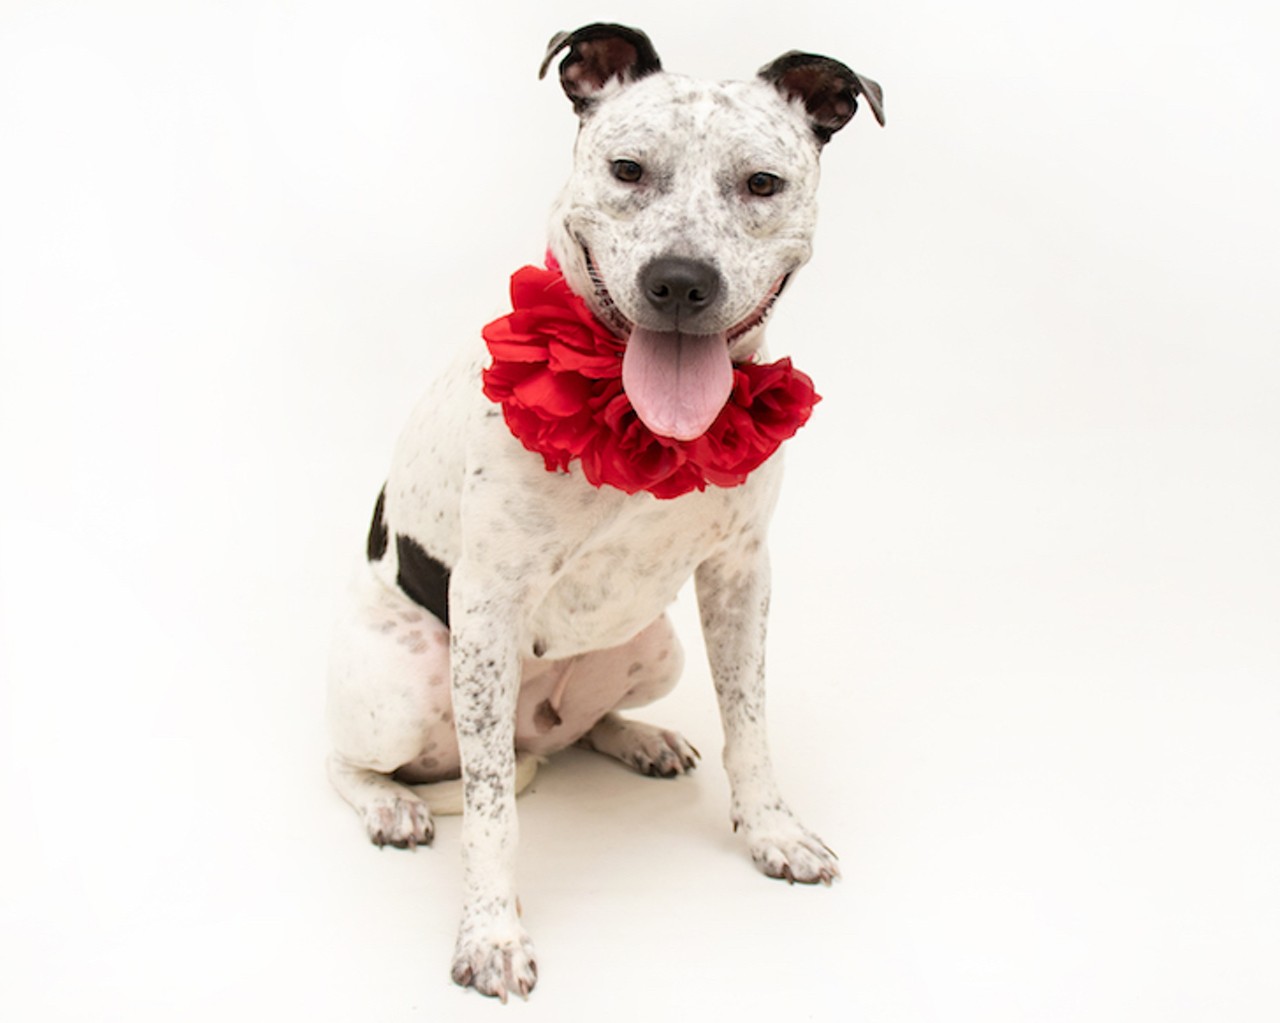 20 adoptable dogs available right now at Orange County Animal Services